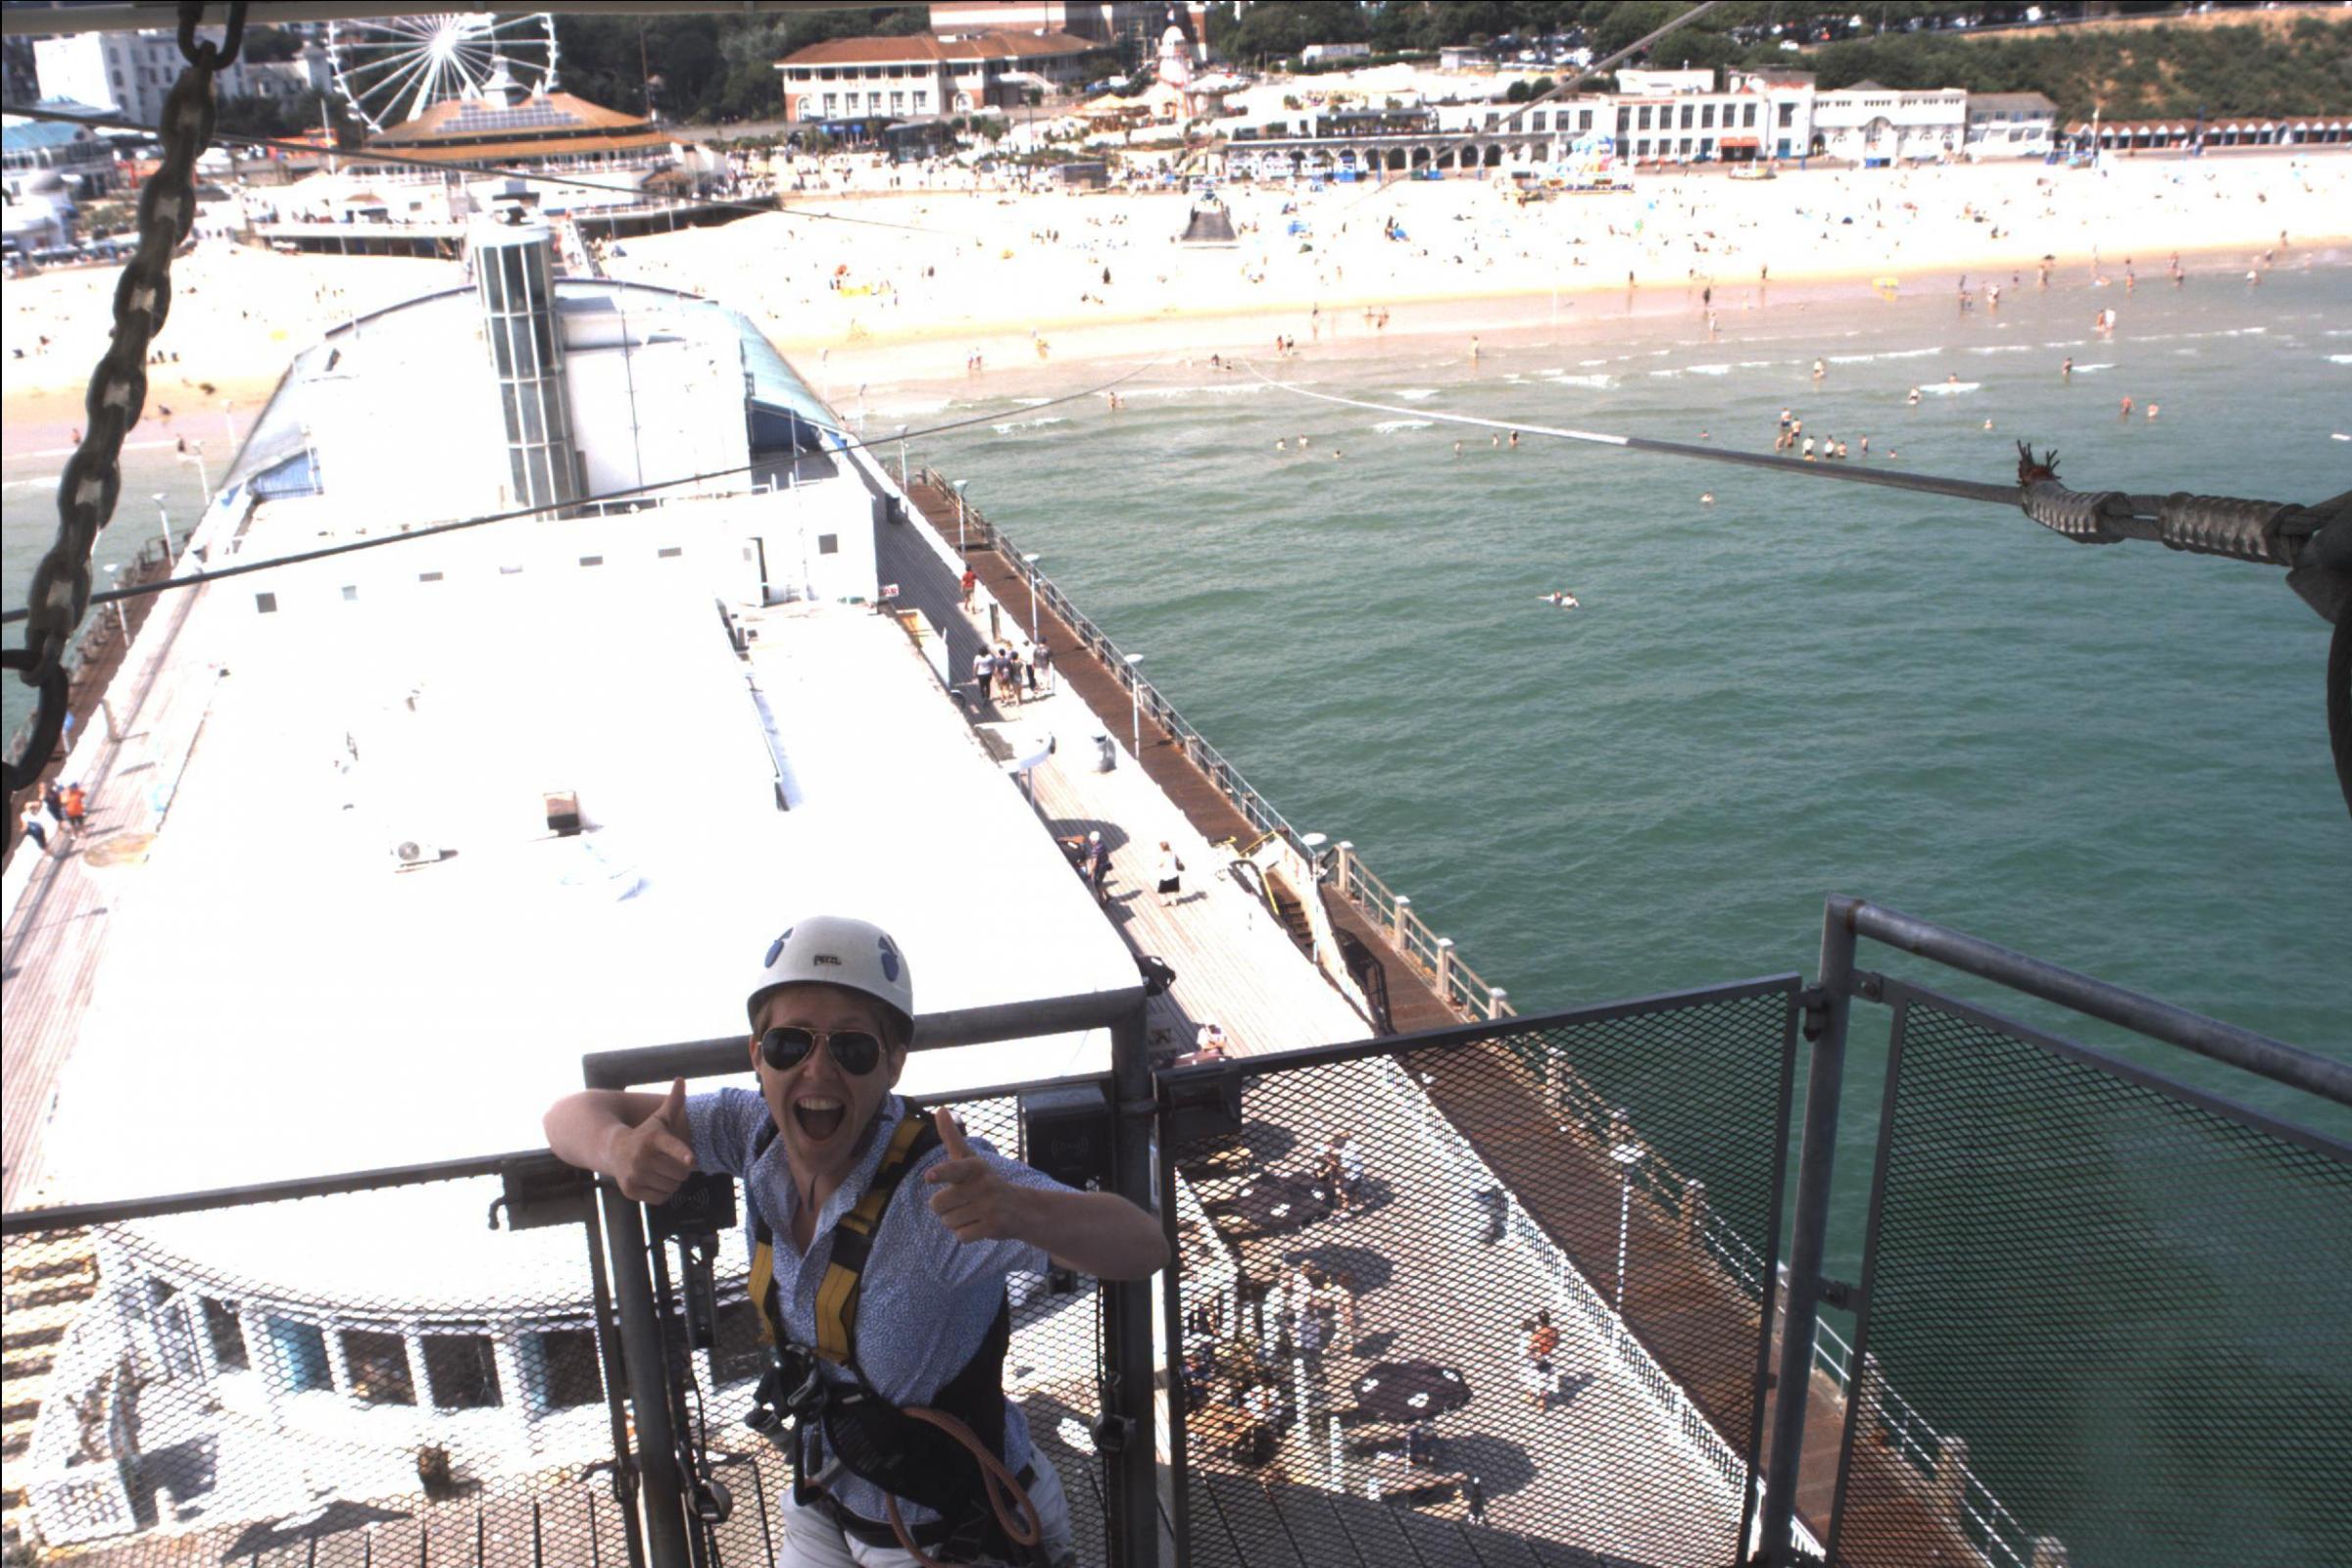 Now you can get a ‘selfie’ taken on Bournemouth’s zipwire